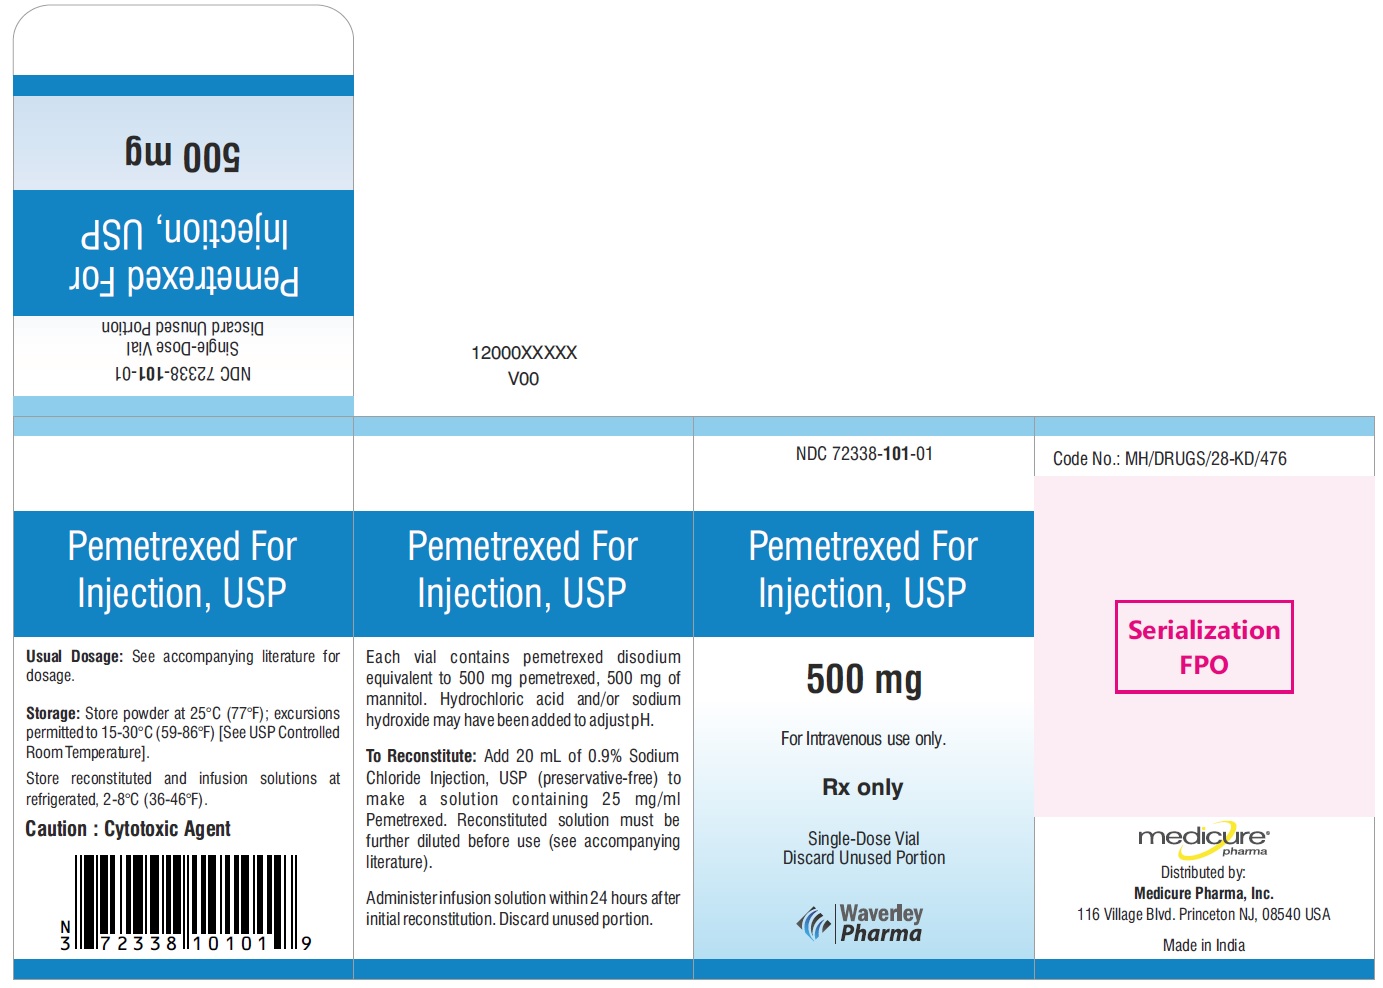 PACKAGE CARTON – Pemetrexed for Injection 500 mg single-dose vial
